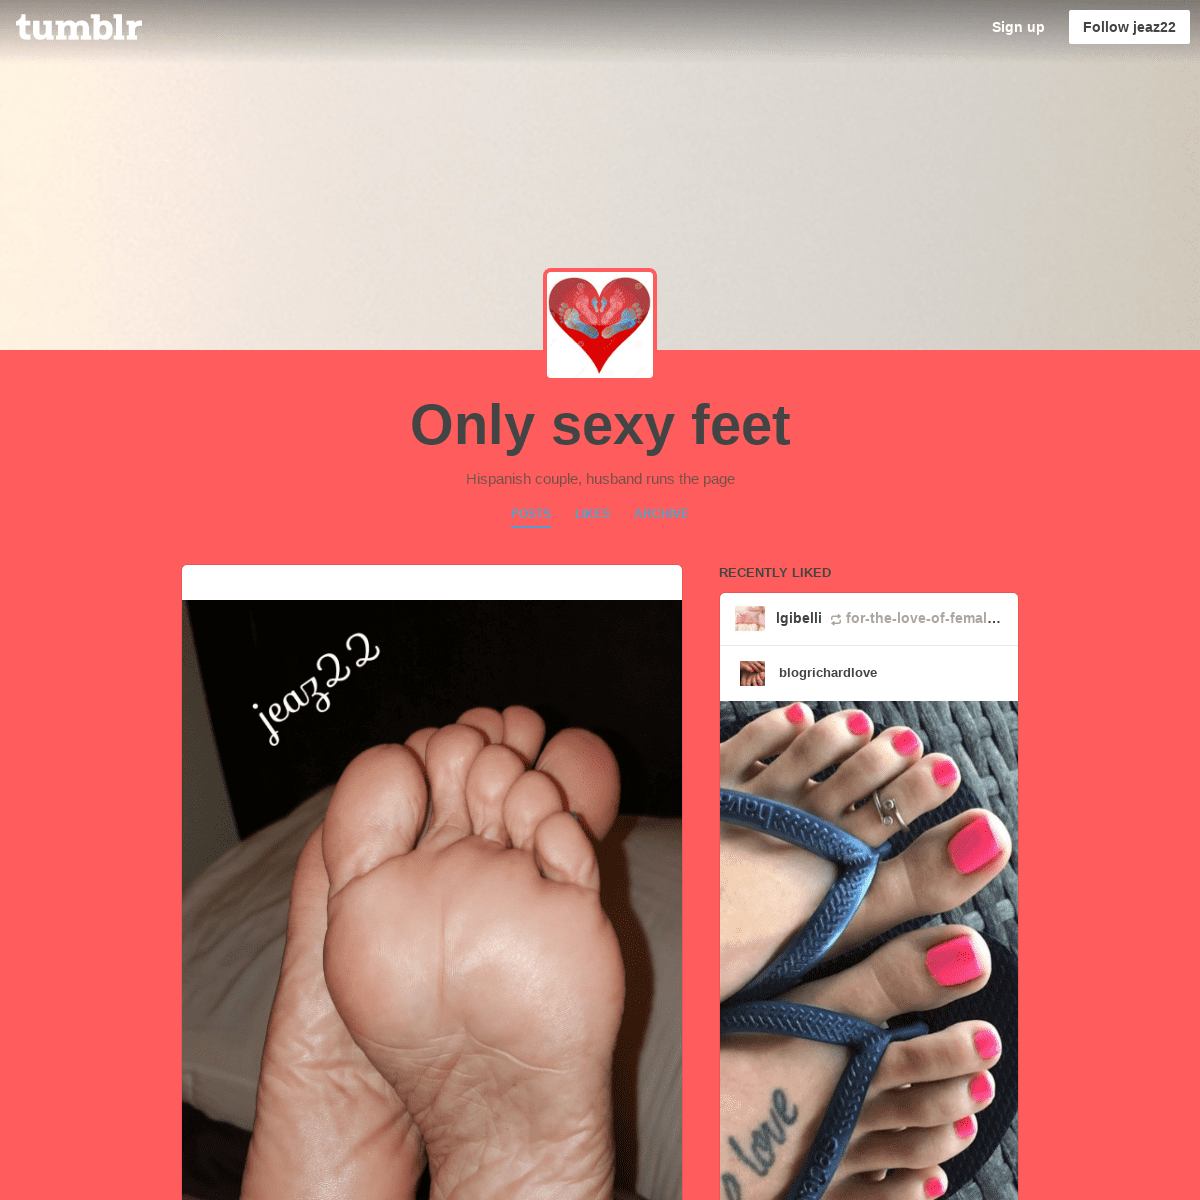 Only sexy feet